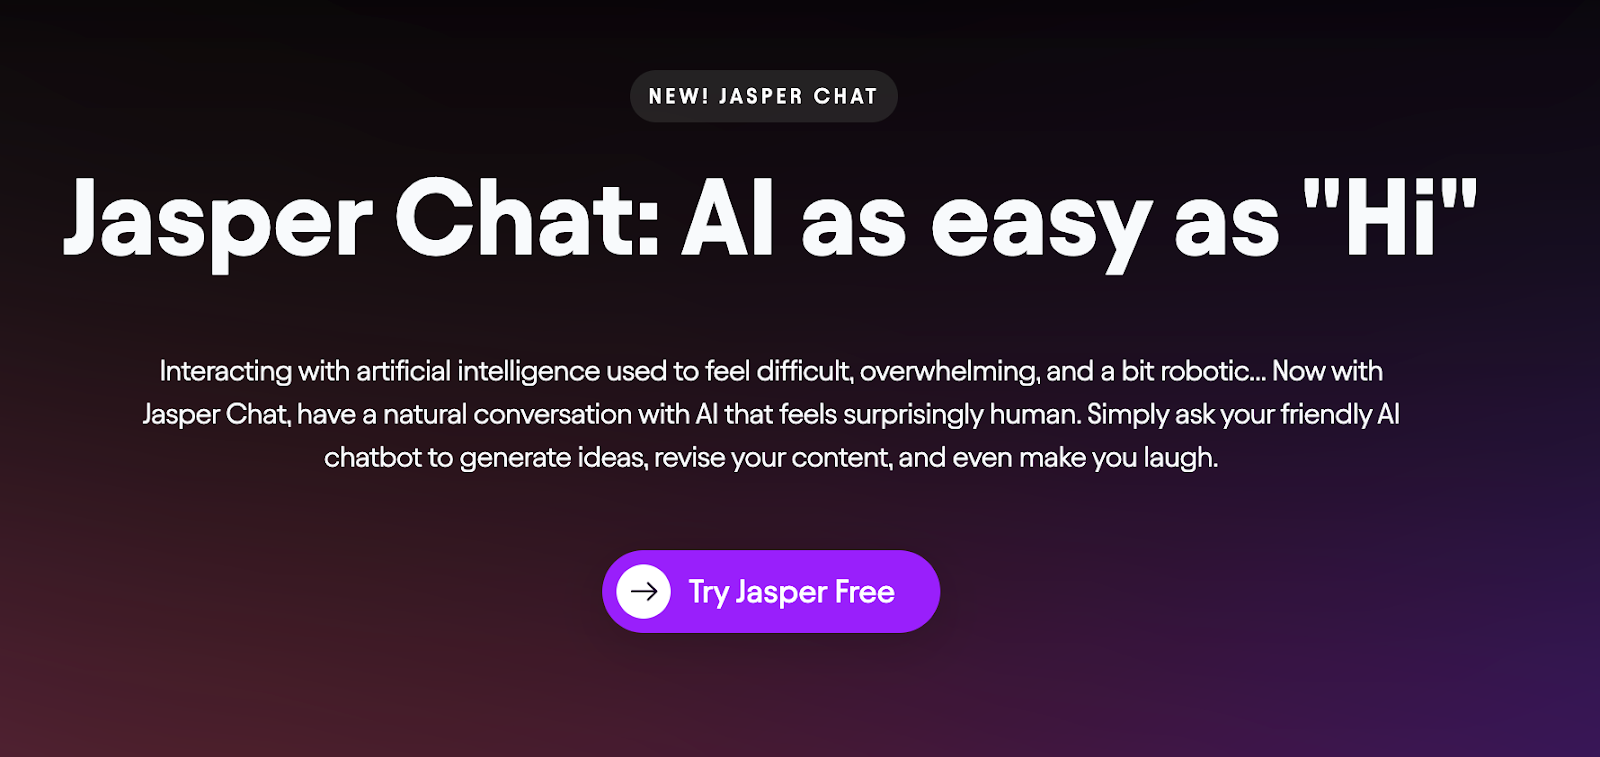 The Jasper Chat product page has a free trial link right under the title